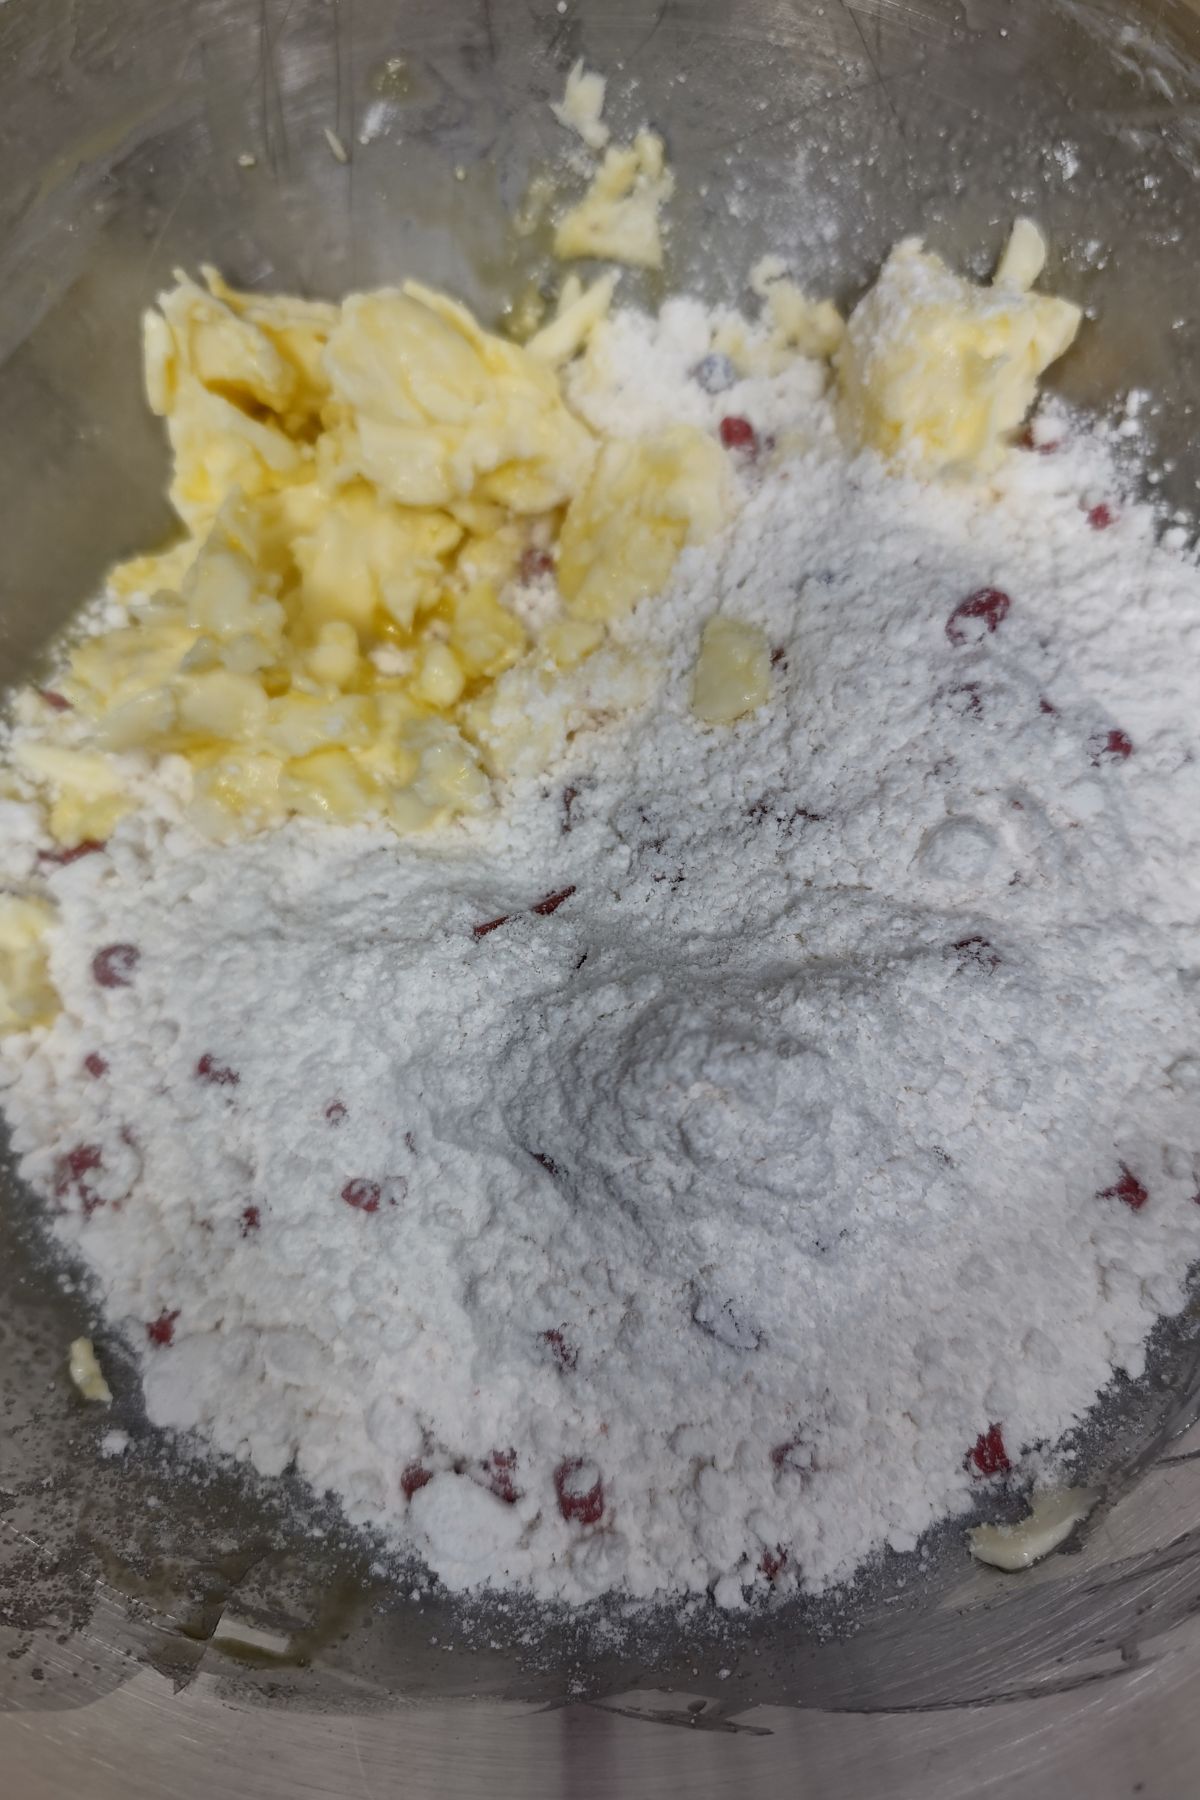 Muffin mix, eggs and butter in a mixing bowl.